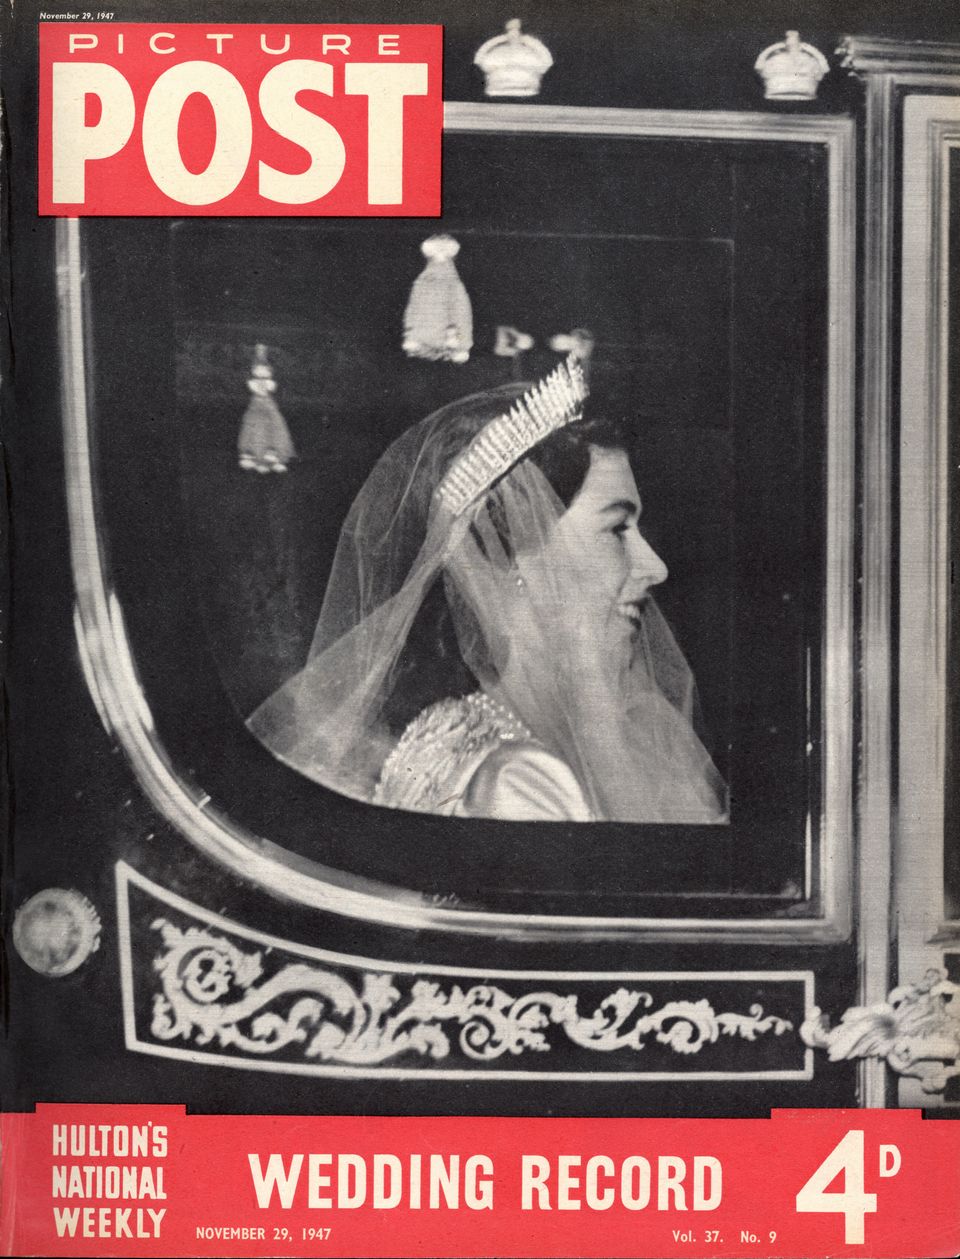 This is what Queen Elizabeth and Prince Philip's wedding looked like